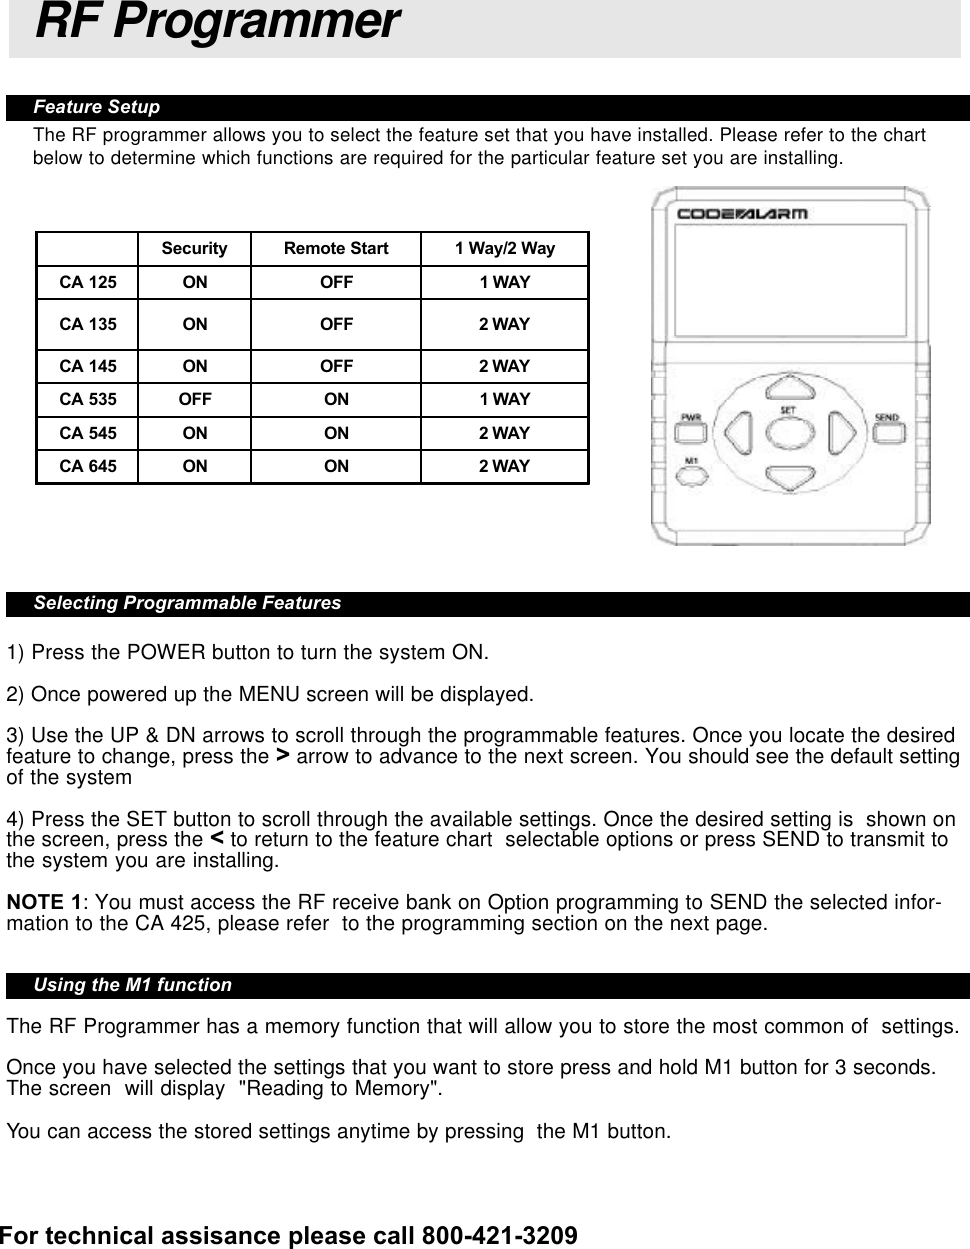 Feature SetupThe RF programmer allows you to select the feature set that you have installed. Please refer to the chartbelow to determine which functions are required for the particular feature set you are installing.Selecting Programmable Features1) Press the POWER button to turn the system ON.2) Once powered up the MENU screen will be displayed.3) Use the UP &amp; DN arrows to scroll through the programmable features. Once you locate the desiredfeature to change, press the &gt; arrow to advance to the next screen. You should see the default settingof the system4) Press the SET button to scroll through the available settings. Once the desired setting is  shown onthe screen, press the &lt; to return to the feature chart  selectable options or press SEND to transmit tothe system you are installing.NOTE 1: You must access the RF receive bank on Option programming to SEND the selected infor-mation to the CA 425, please refer  to the programming section on the next page.Using the M1 functionThe RF Programmer has a memory function that will allow you to store the most common of  settings.Once you have selected the settings that you want to store press and hold M1 button for 3 seconds.The screen  will display  &quot;Reading to Memory&quot;.You can access the stored settings anytime by pressing  the M1 button.RF ProgrammerSecurity Remote Start 1 Way/2 WayCA 125 ON OFF 1 WAYCA 135 ON OFF 2 WAYCA 145 ON OFF 2 WAYCA 535 OFF ON 1 WAYCA 545 ON ON 2 WAYCA 645 ON ON 2 WAYFor technical assisance please call 800-421-3209